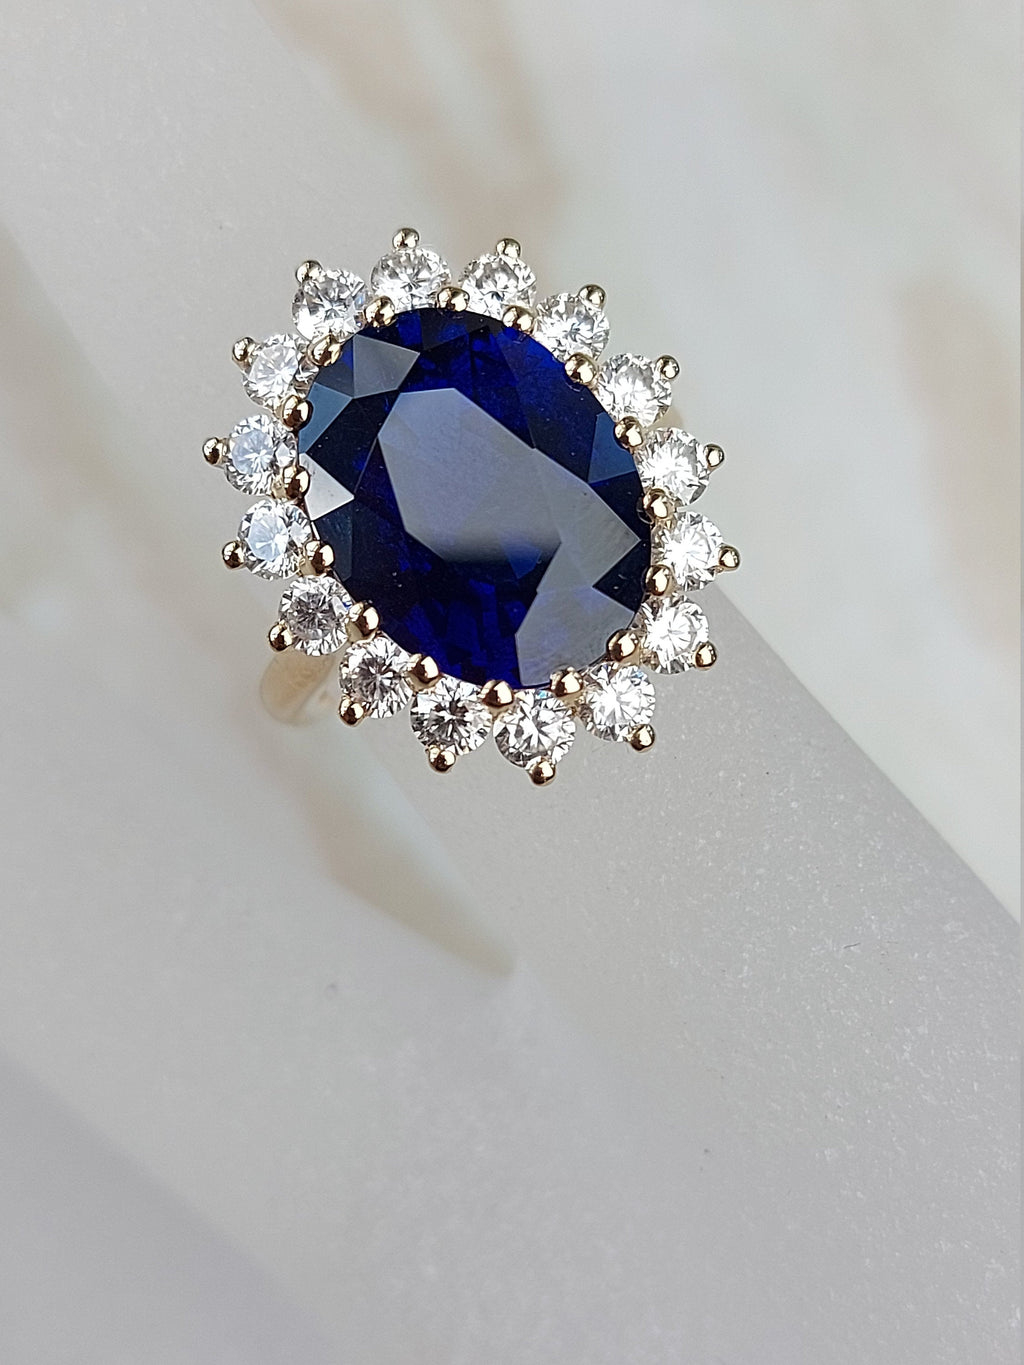 Princess Diana Natural Certified Blue Sapphire Engagement Ring, Oval cut 14k yellow gold diamond ring, 6 Ct Blue sapphire ring.